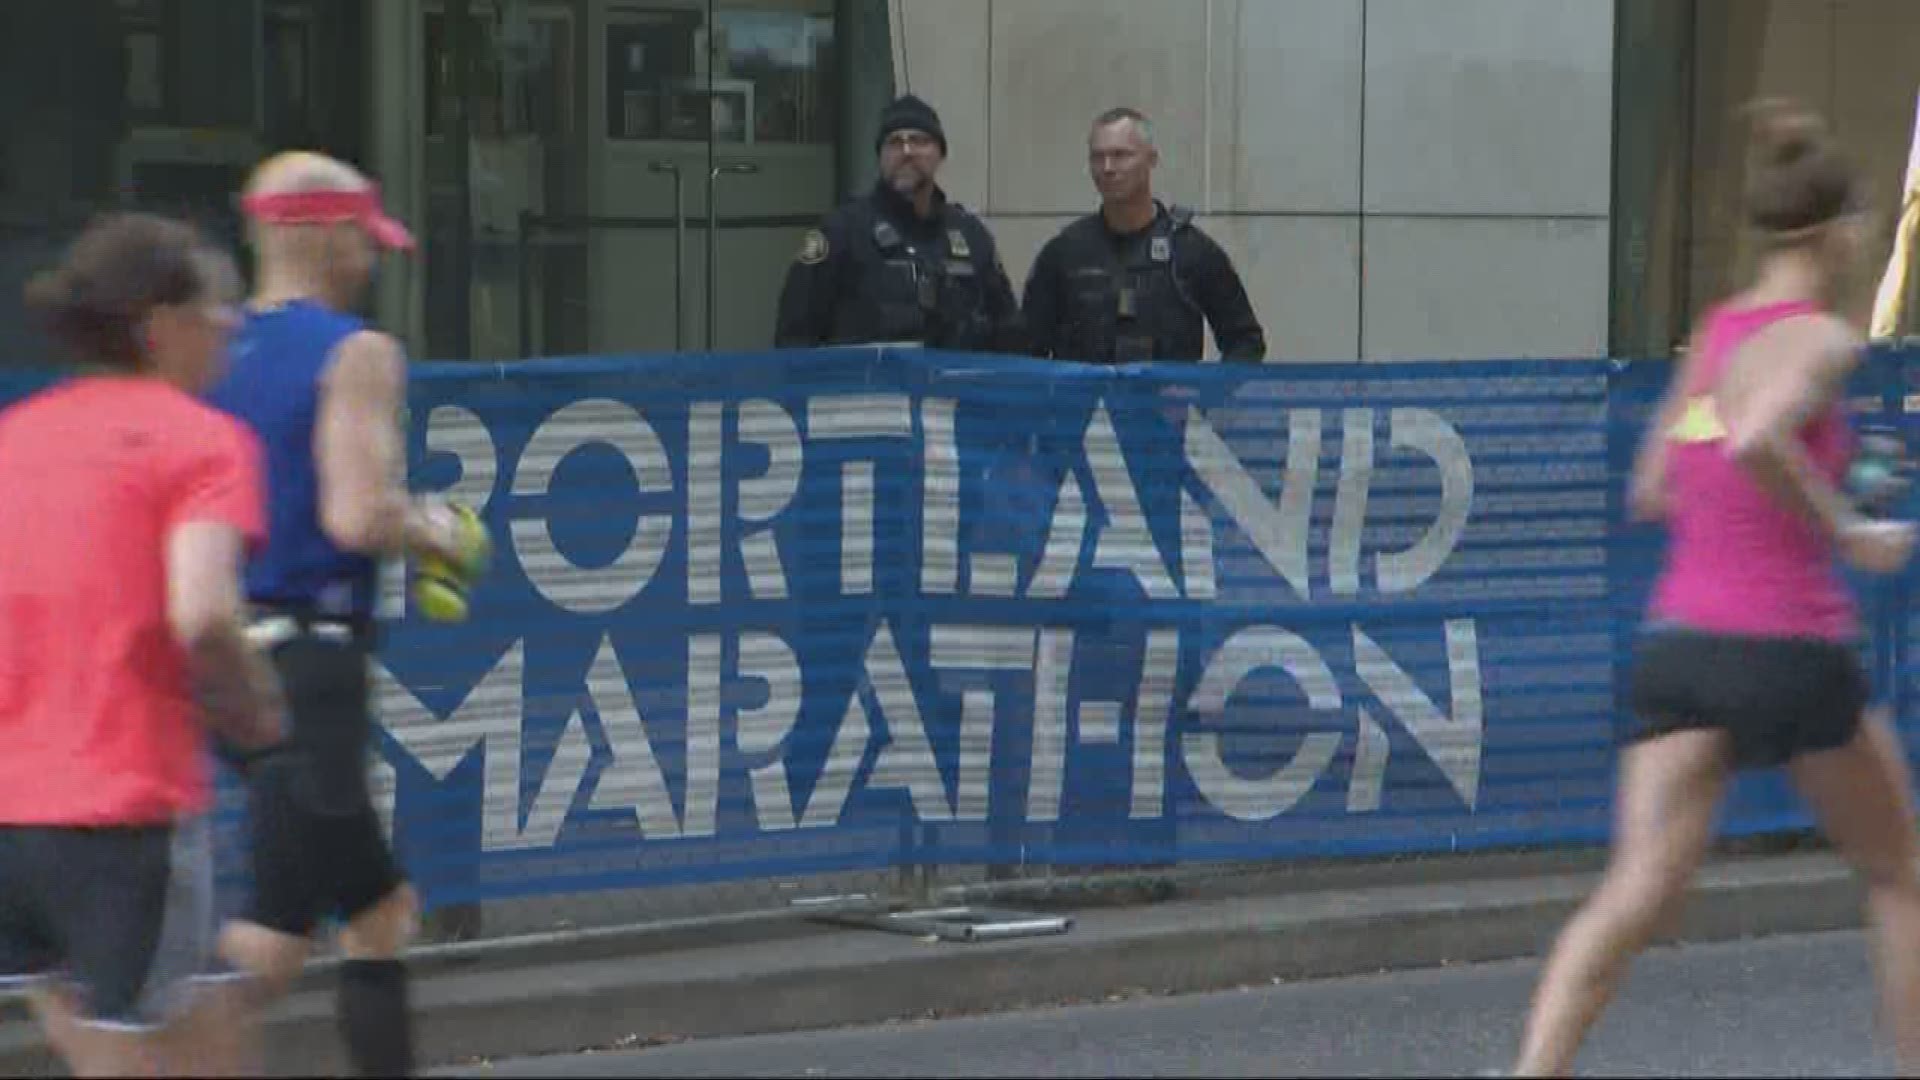 PBOT and Portland marathon agree on route